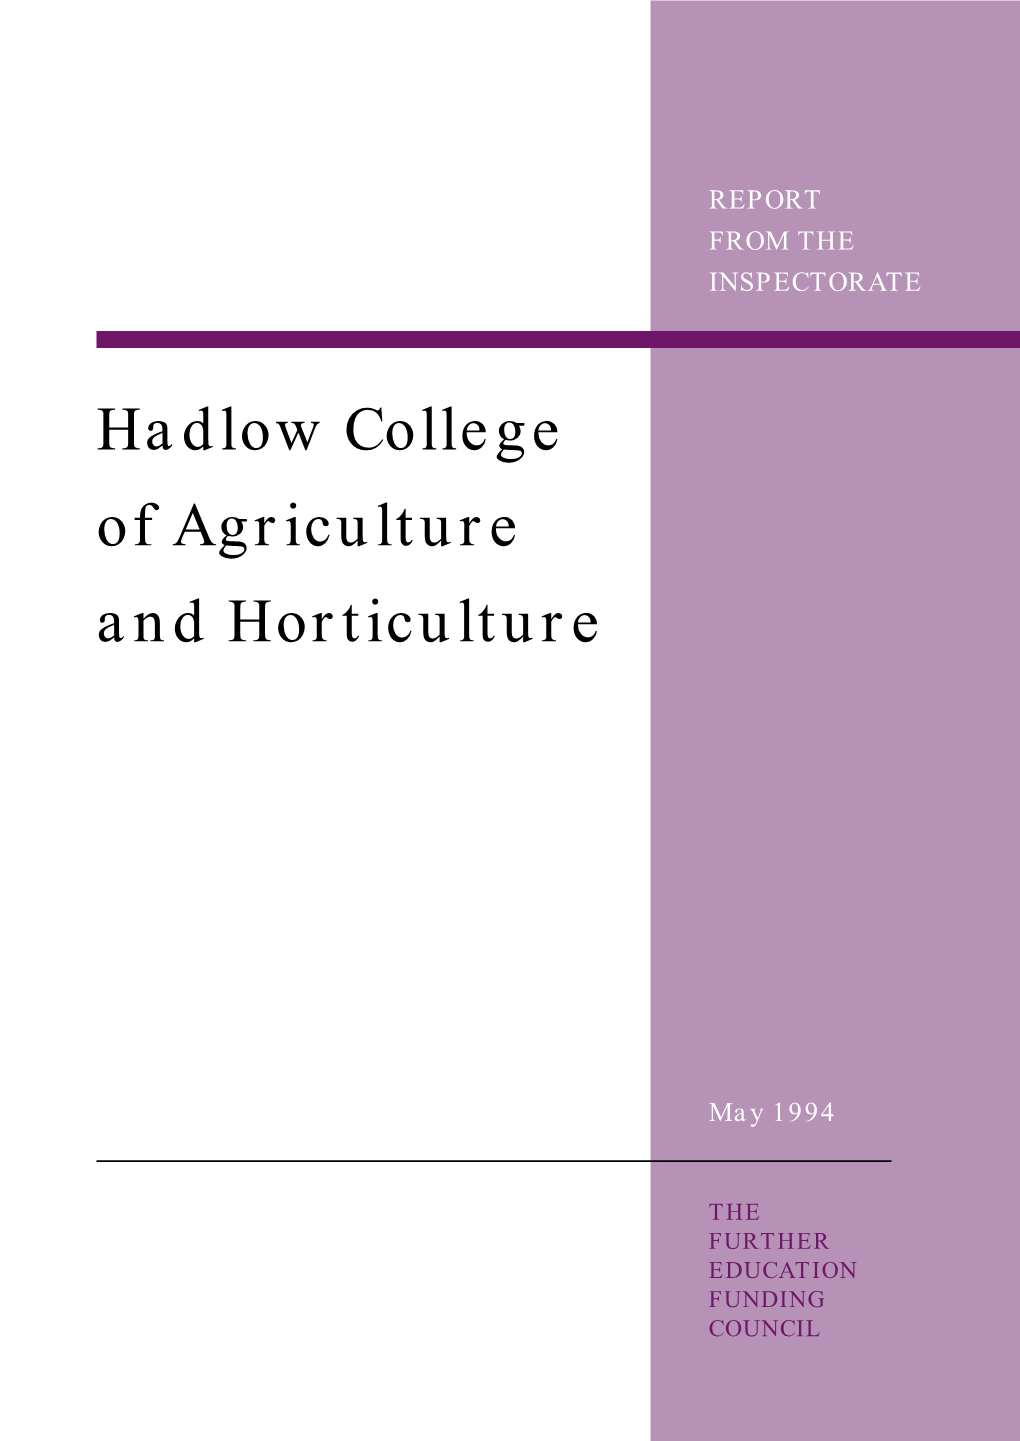 Hadlow College of Agriculture and Horticulture